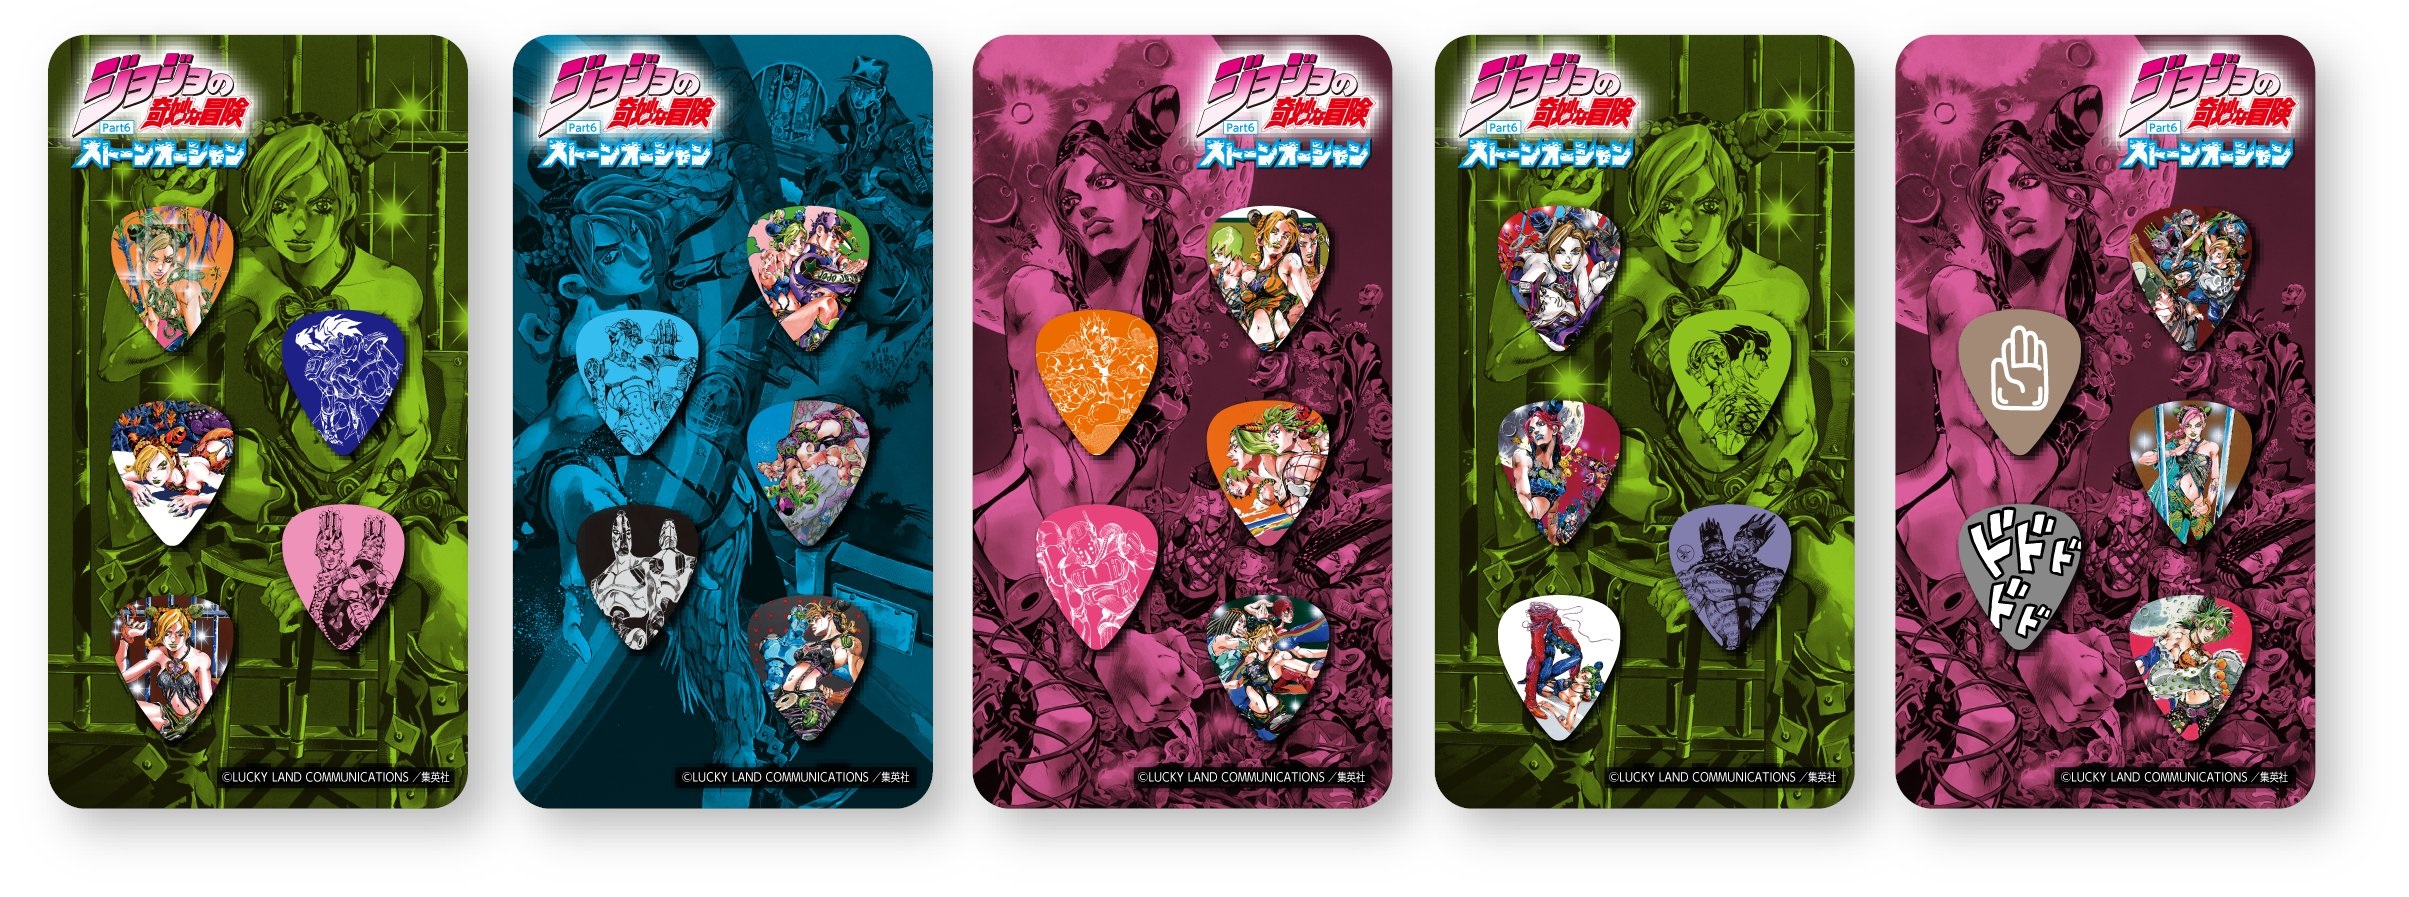 Stone Ocean Effect Pedal and Guitar Accessories Release In Japan